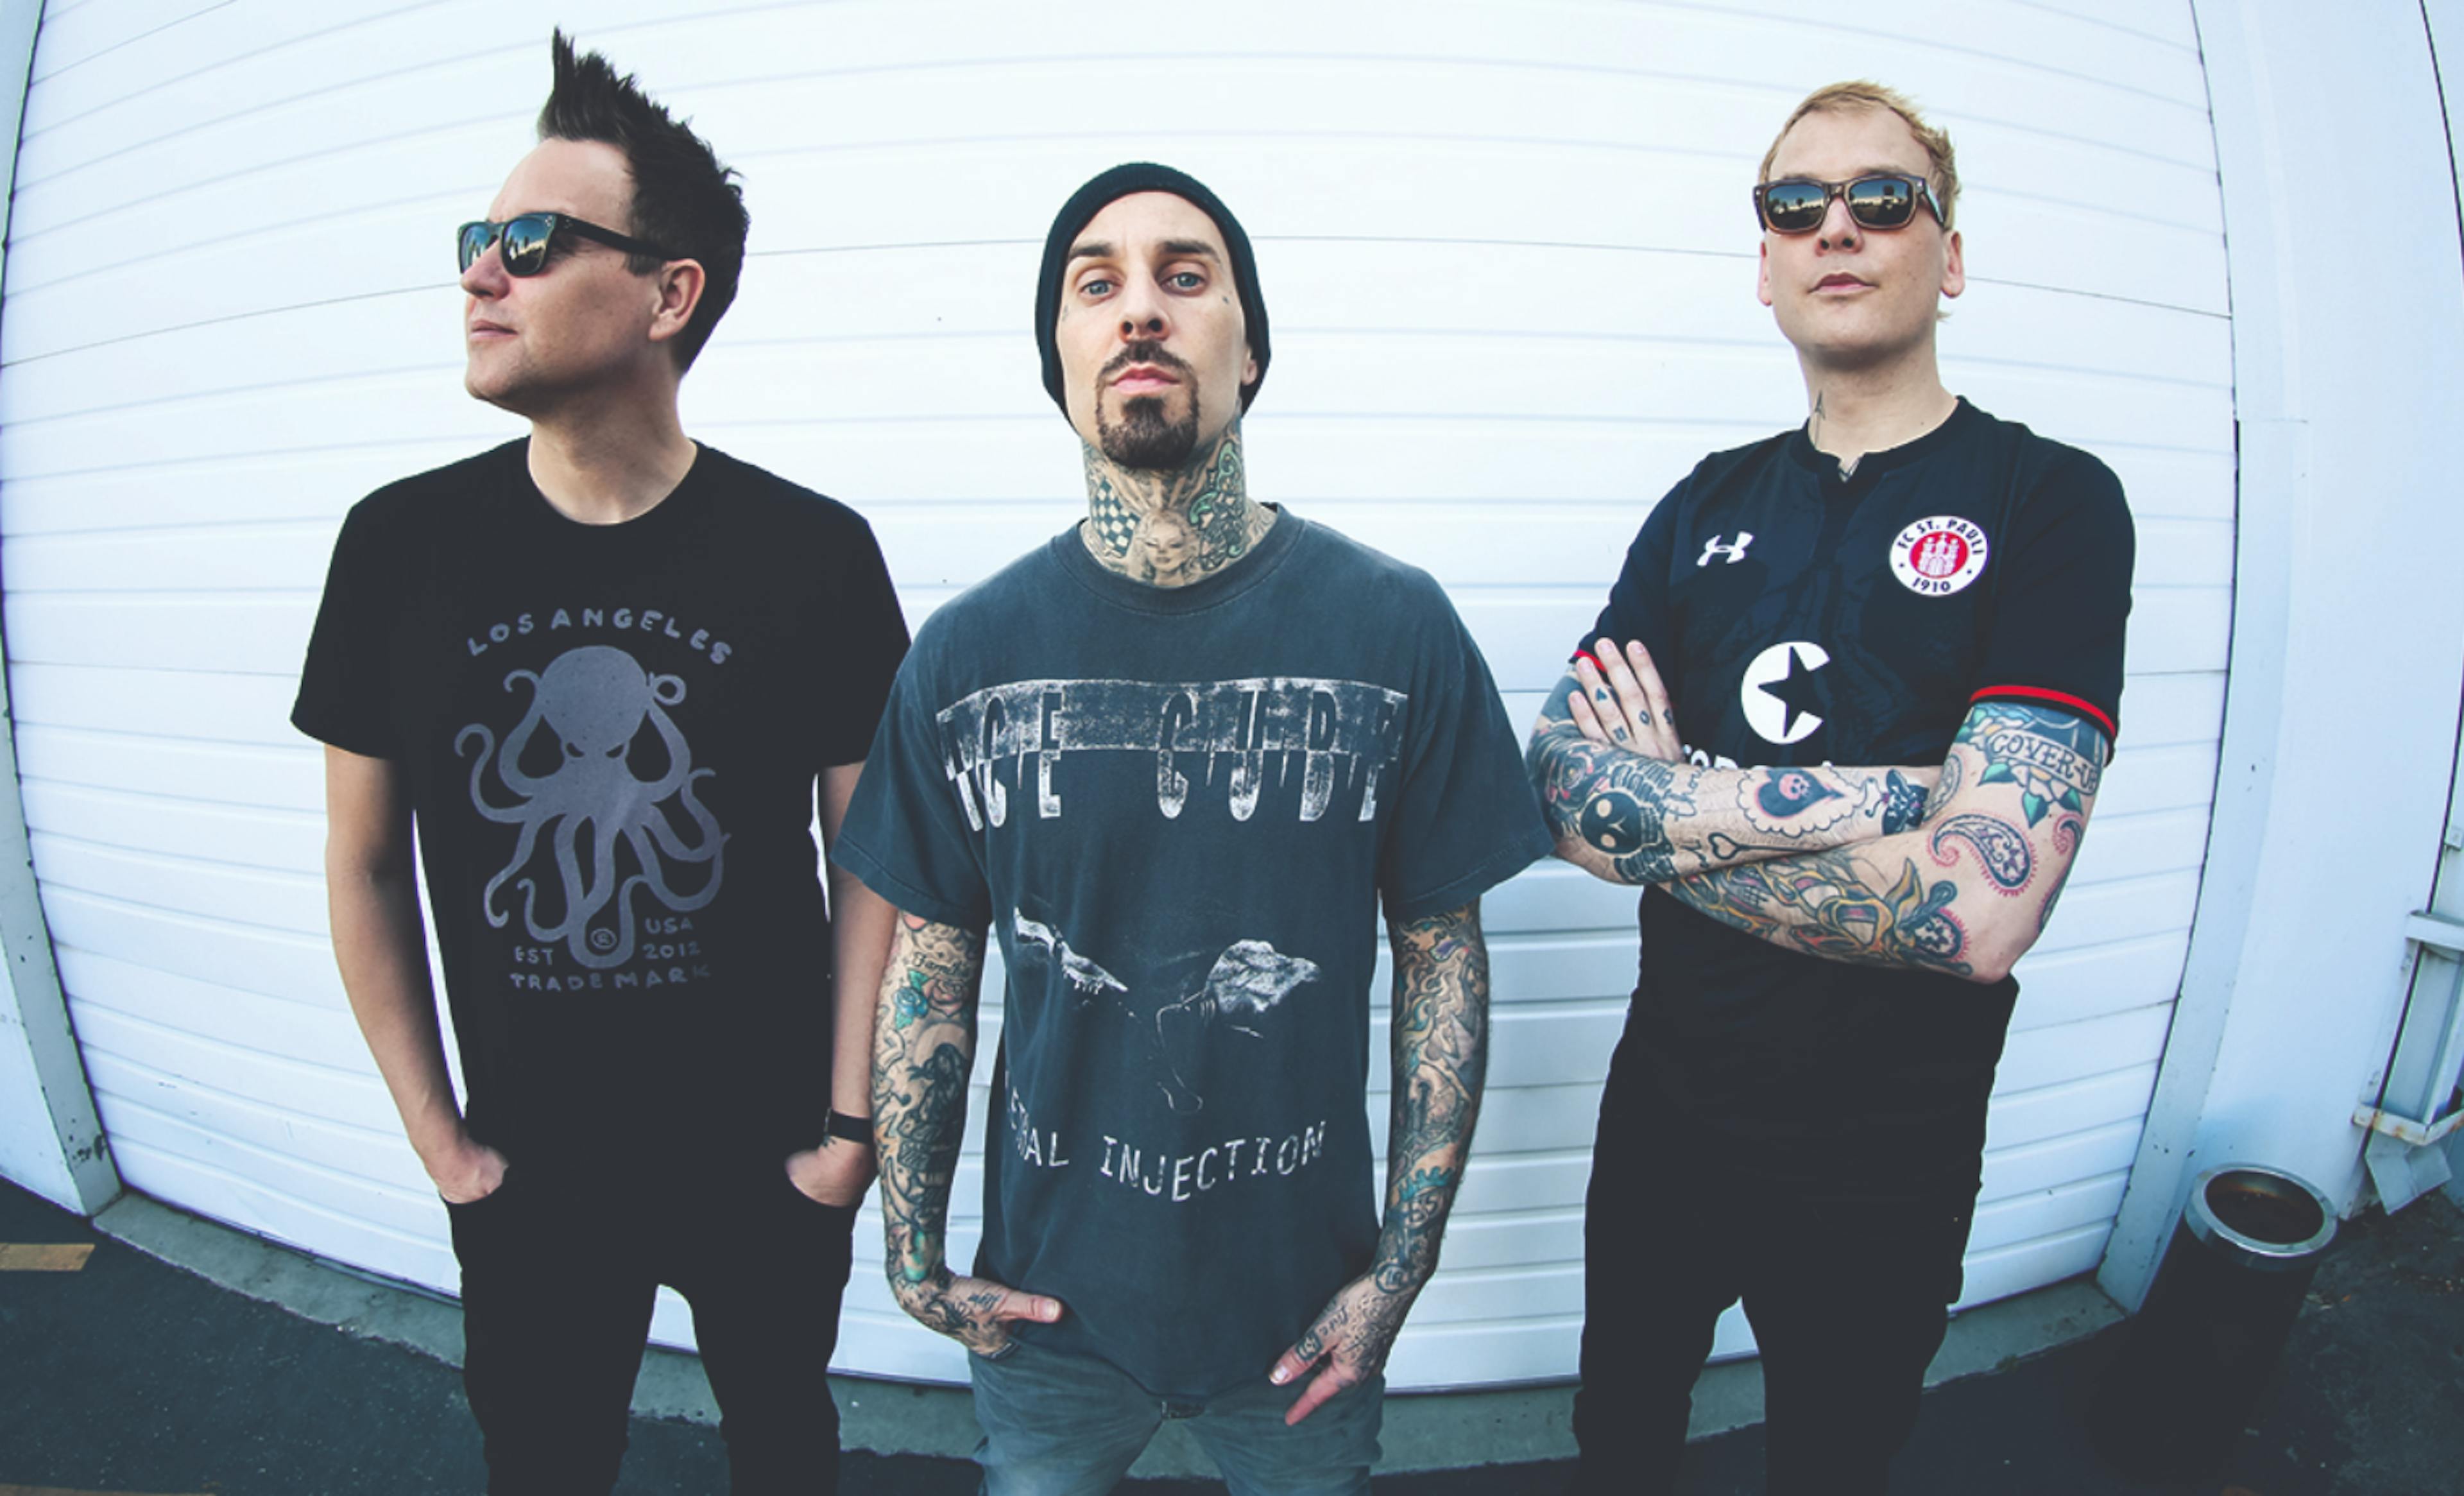 blink-182 Are Looking At Touring Europe In 2020